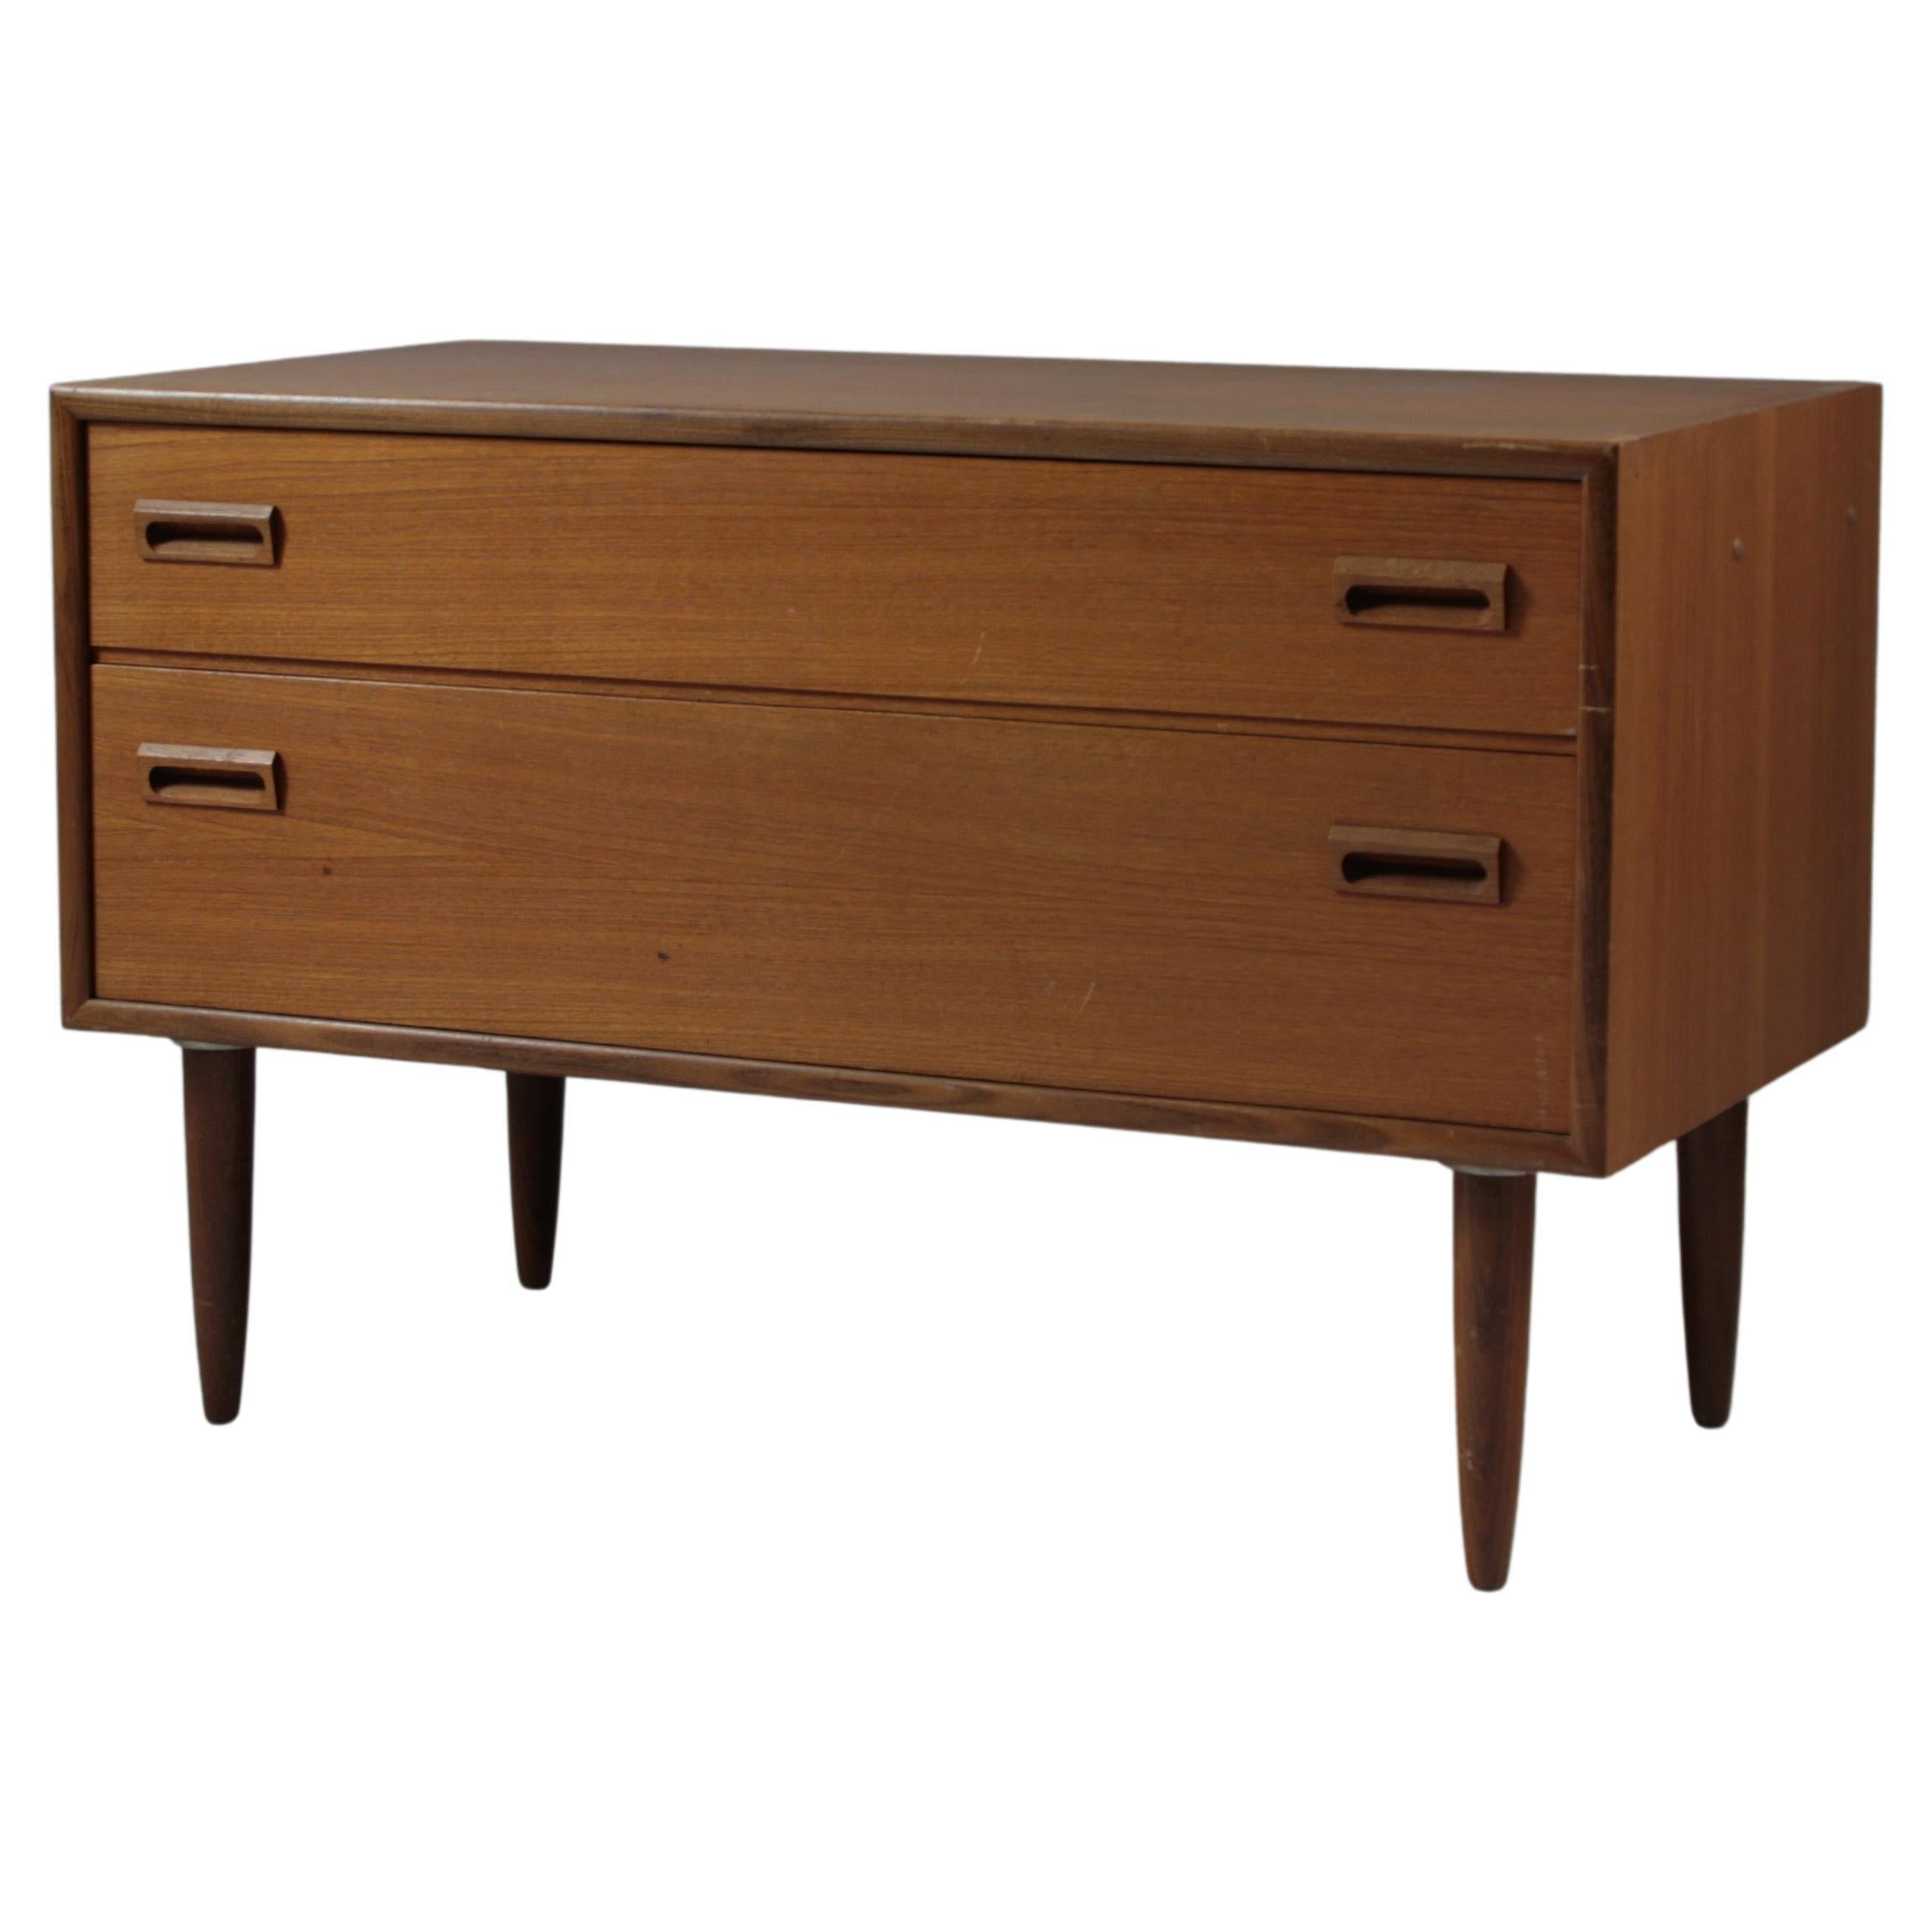 Small teak chest of drawers by Stratégie Meubelen, 1950s For Sale